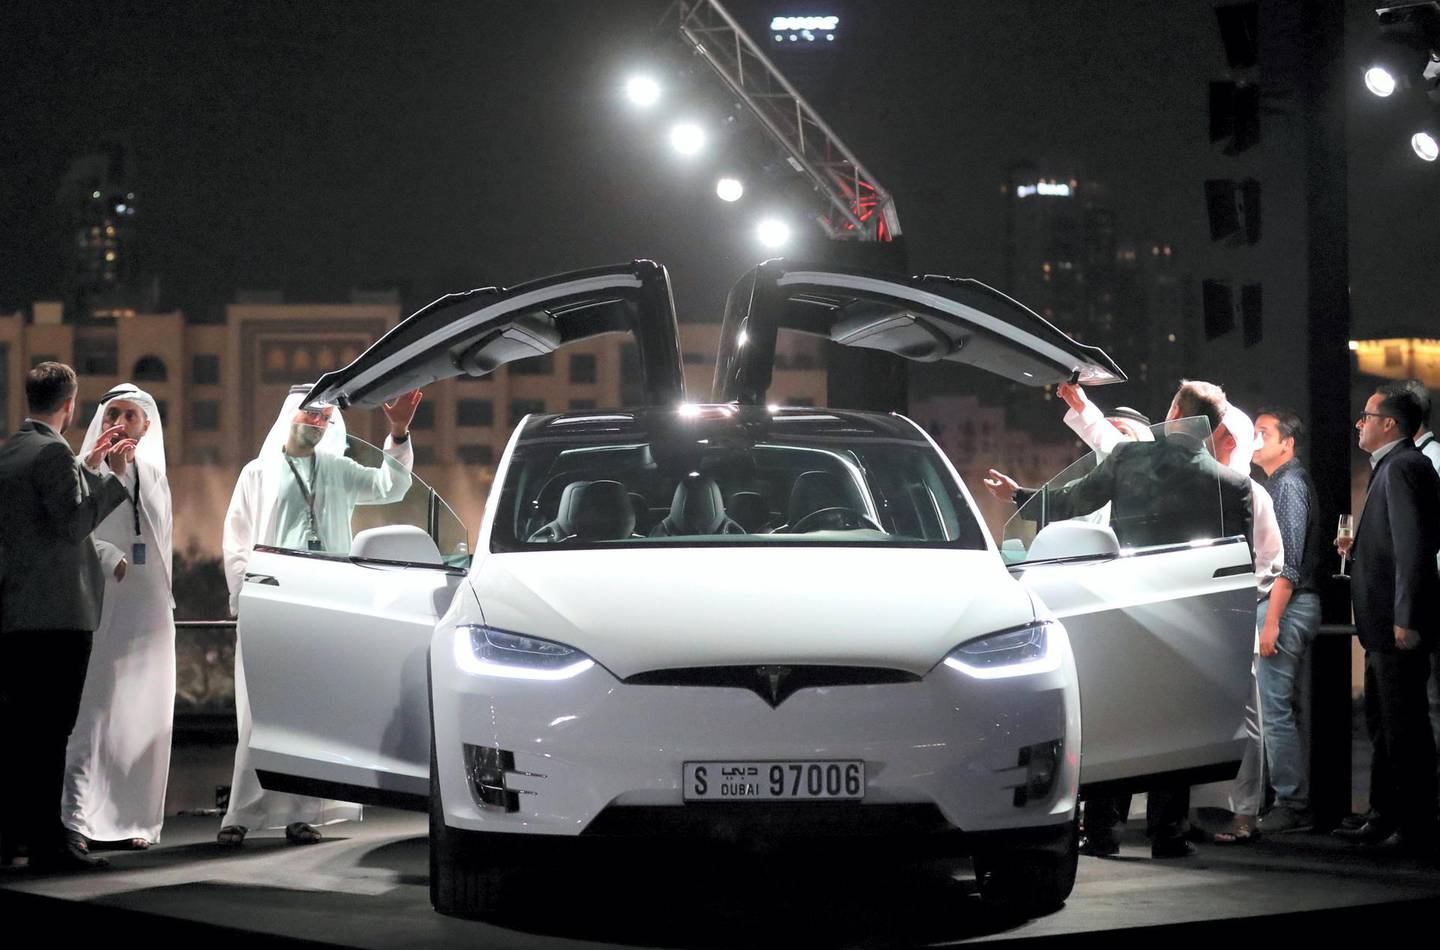 Emirati men check a vehicle manufactured by Electric carmaker Tesla during a ceremony in Dubai, on February 13, 2017.


Tesla announced the opening of a new Gulf headquarters in Dubai, aiming to conquer an oil-rich region better known for gas guzzlers than environmentally friendly motoring. / AFP PHOTO / KARIM SAHIB